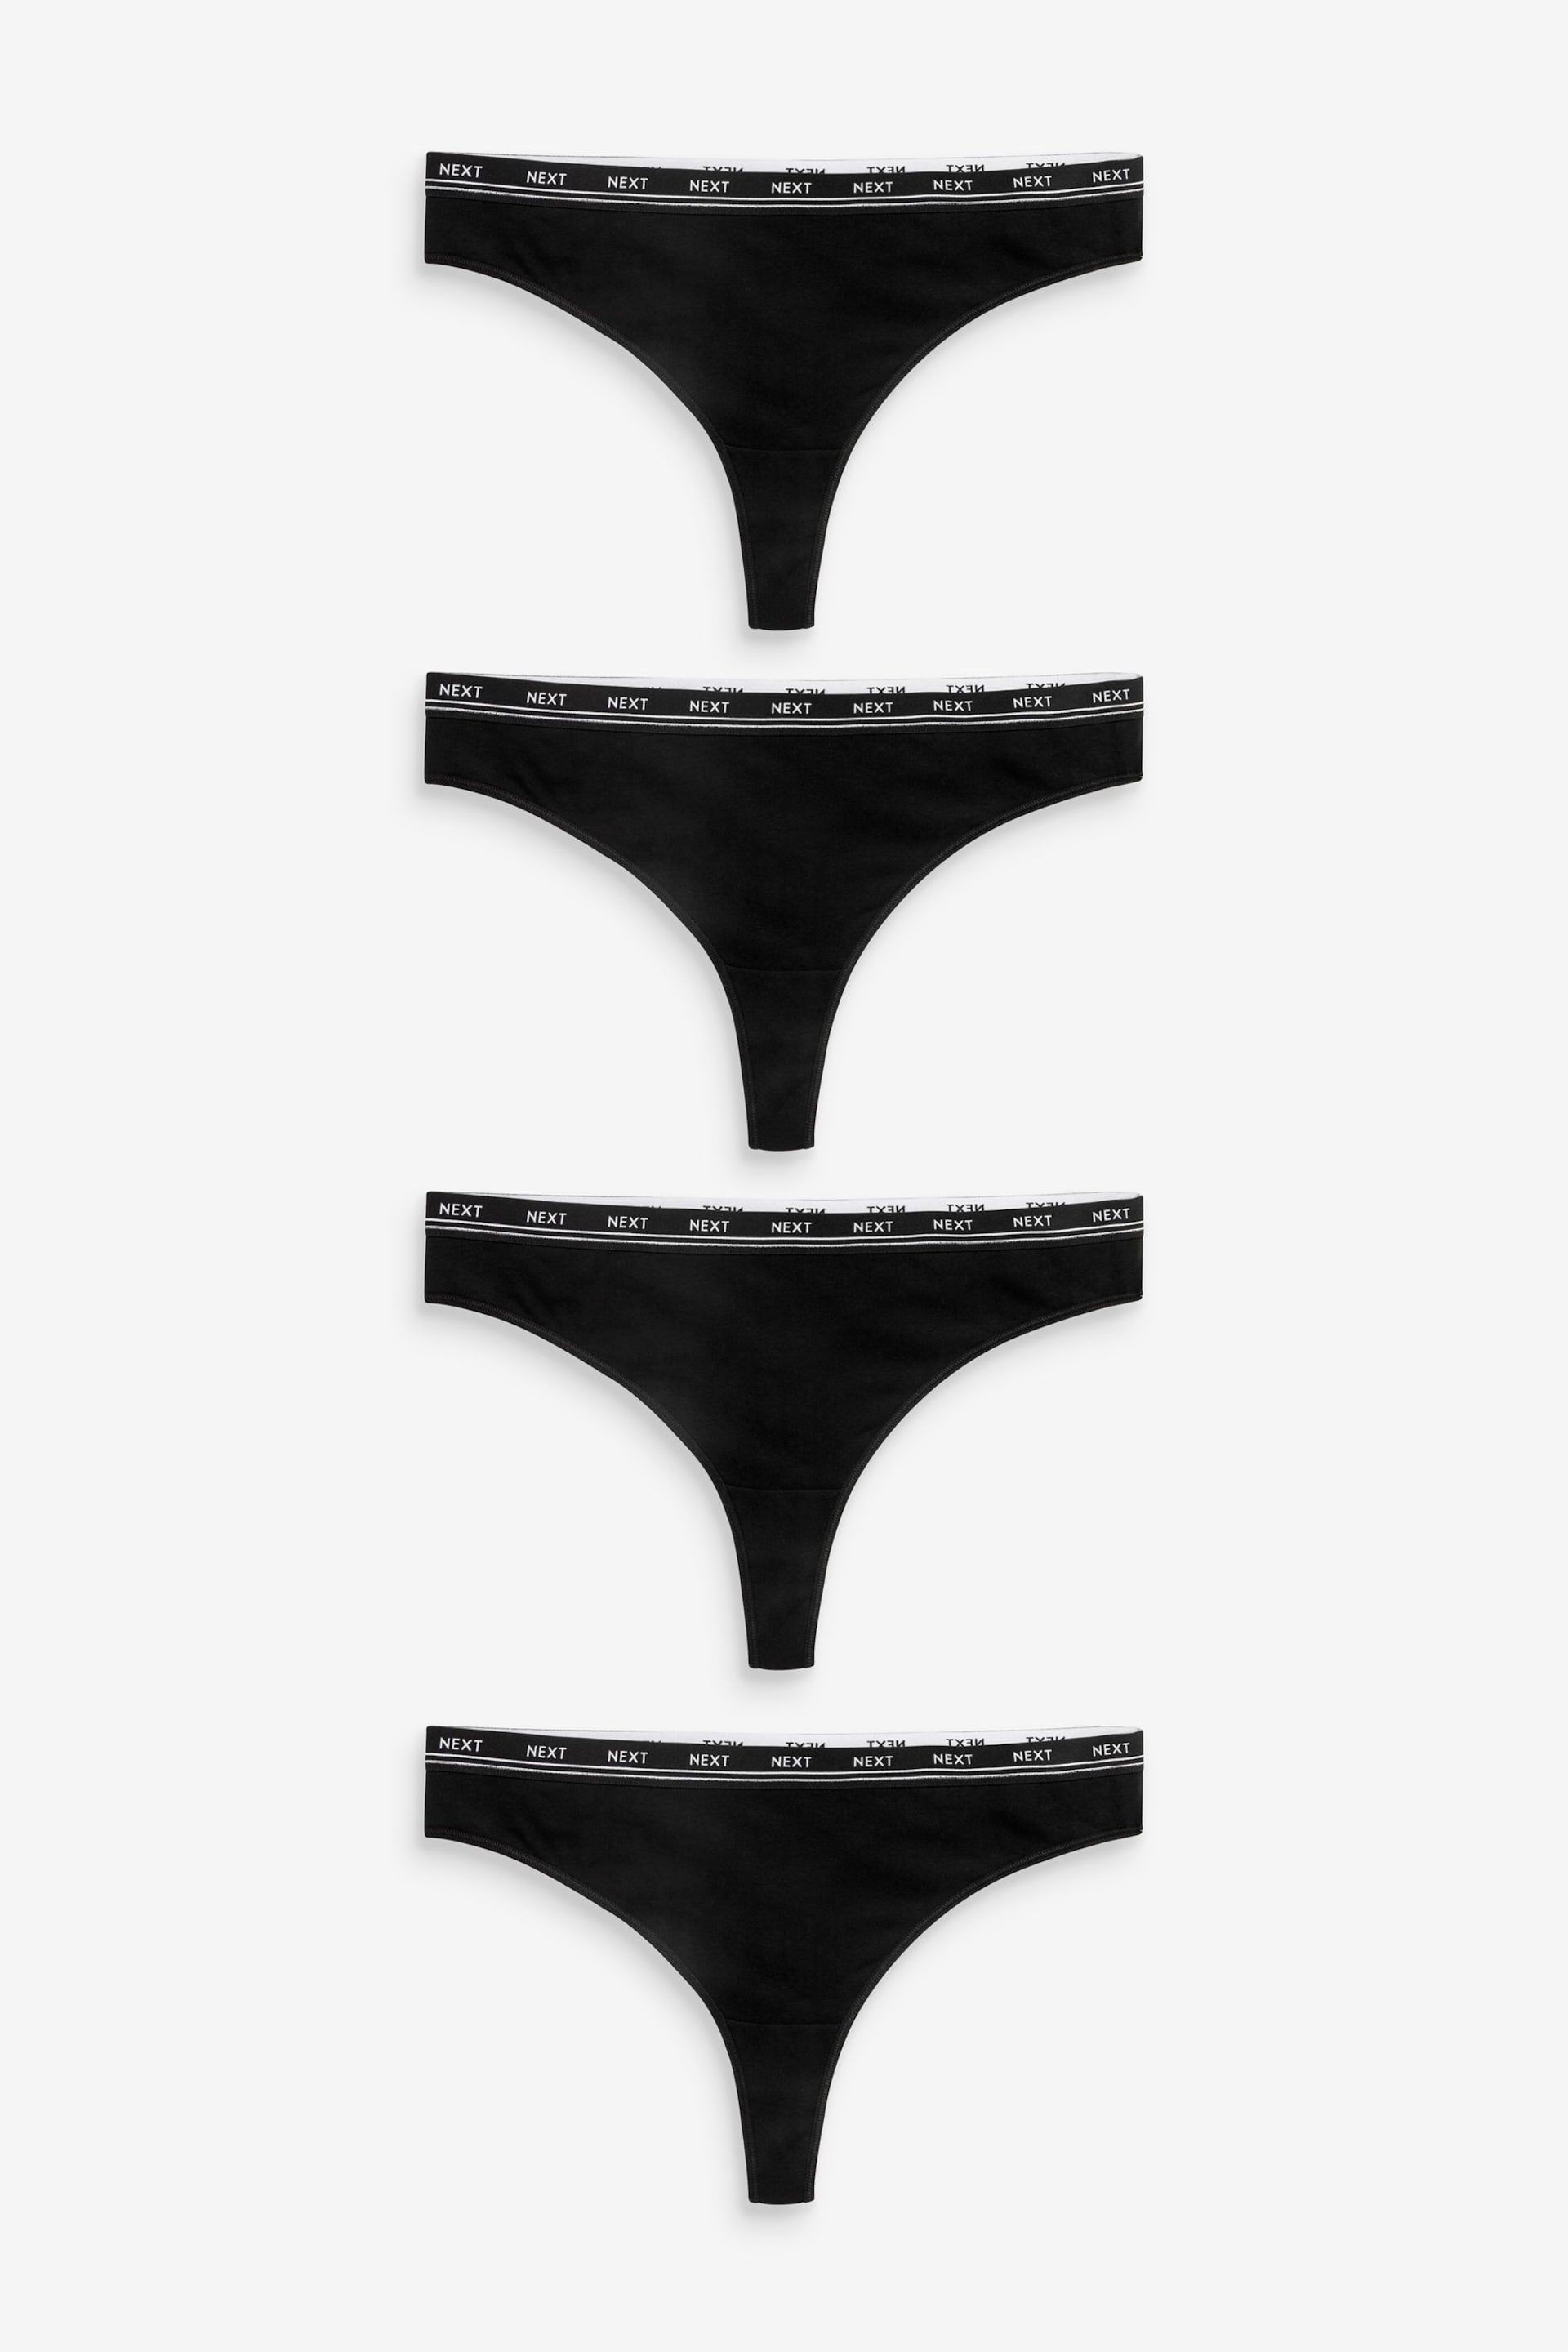 Black Thong Cotton Rich Logo Knickers 4 Pack - Image 1 of 5